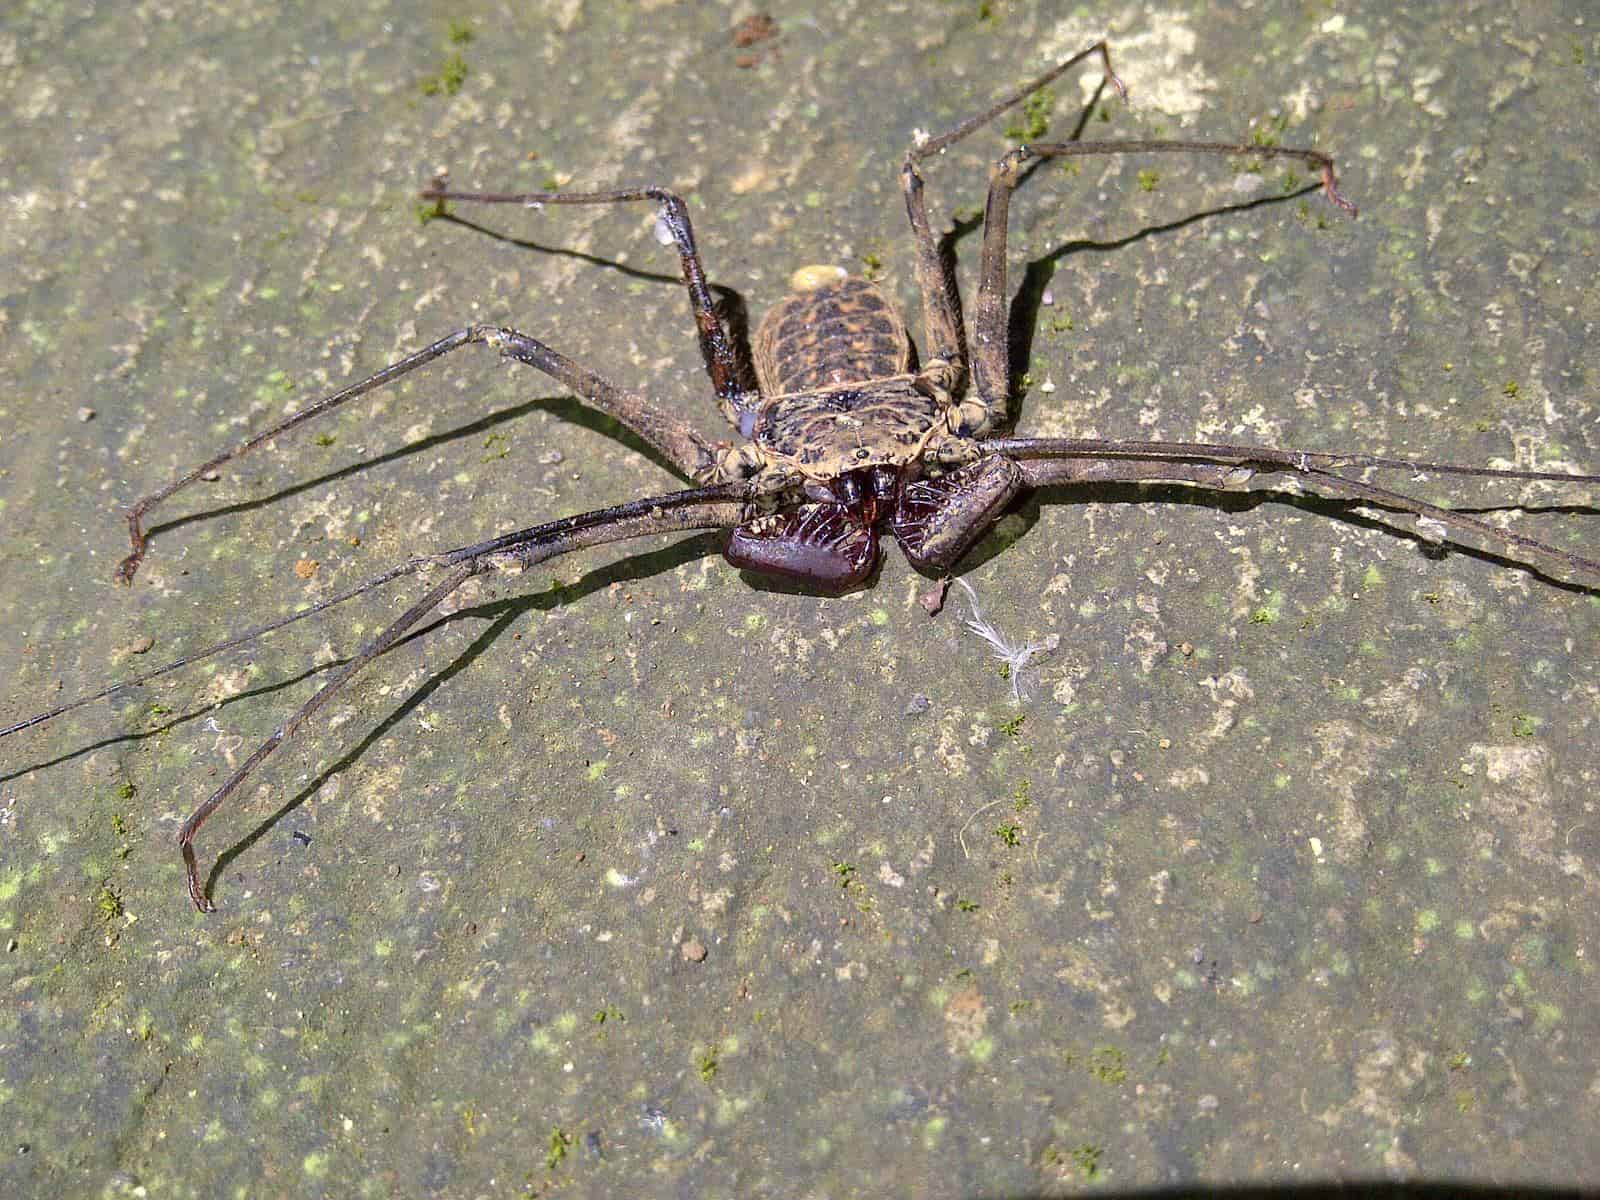 Tailless Whip Scorpion on ground